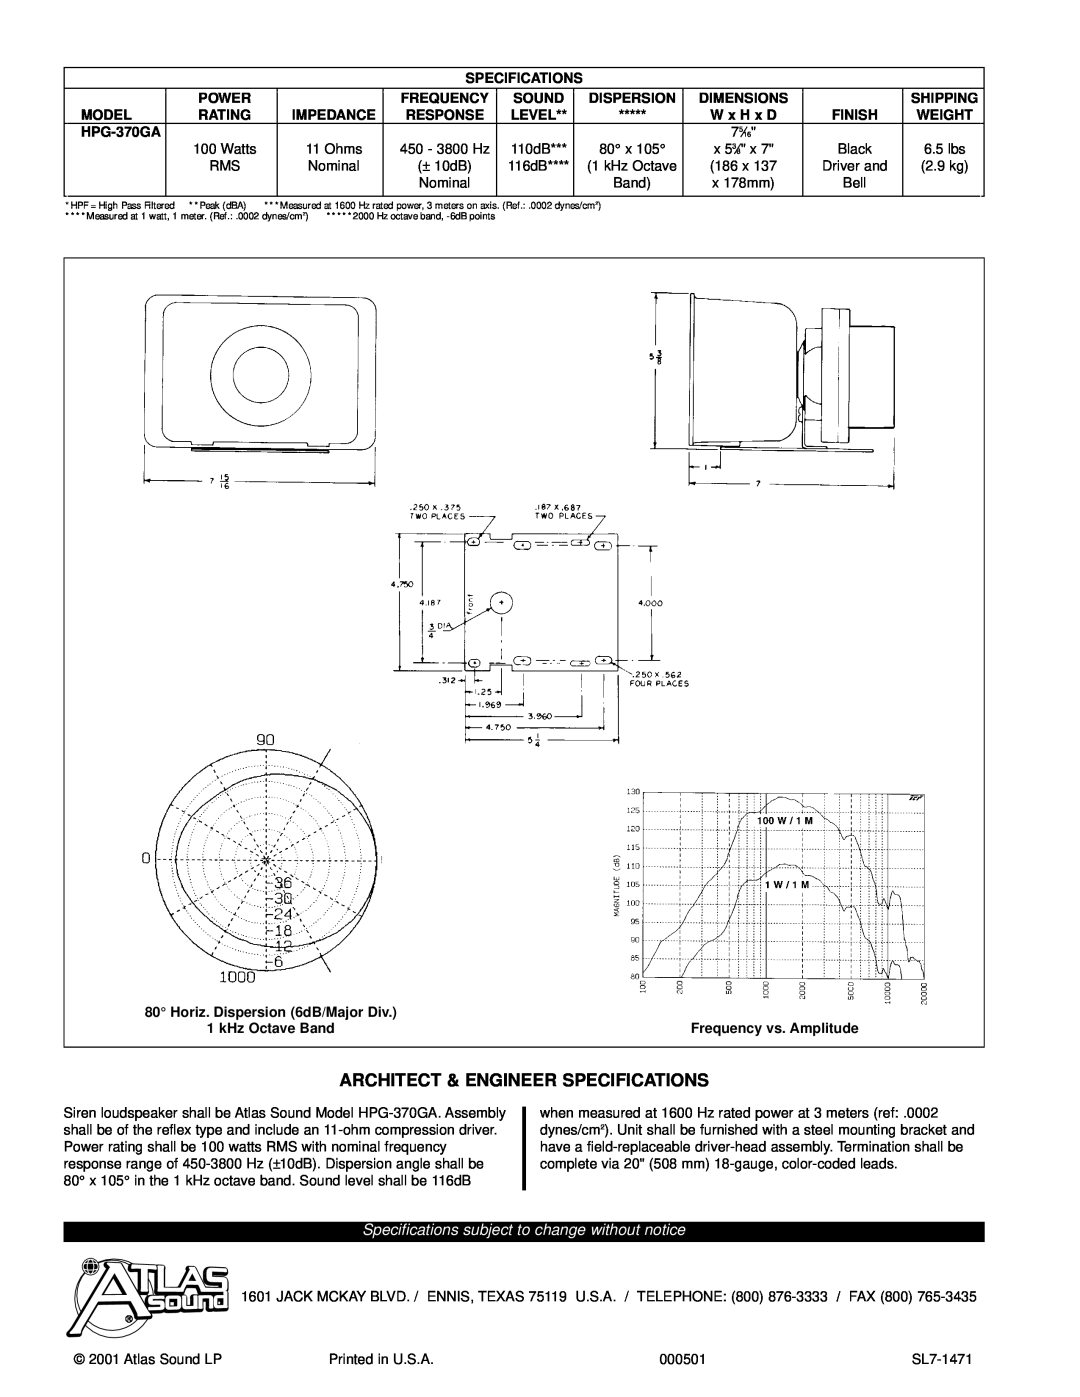 Atlas Sound HPG-370GA, SD-370A, K-370 Architect & Engineer Specifications, Specifications subject to change without notice 